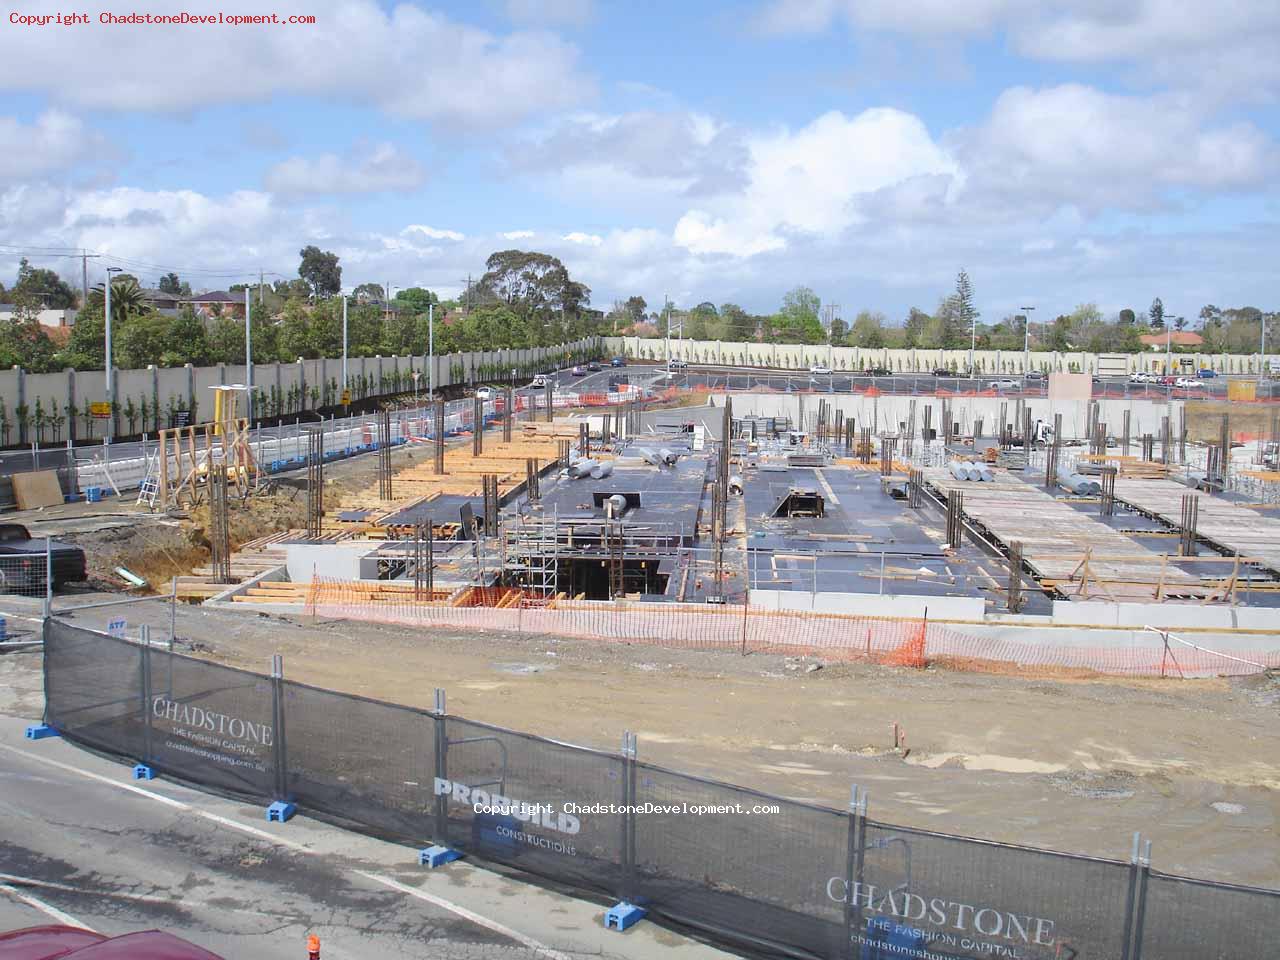  - Chadstone Development Discussions Gallery